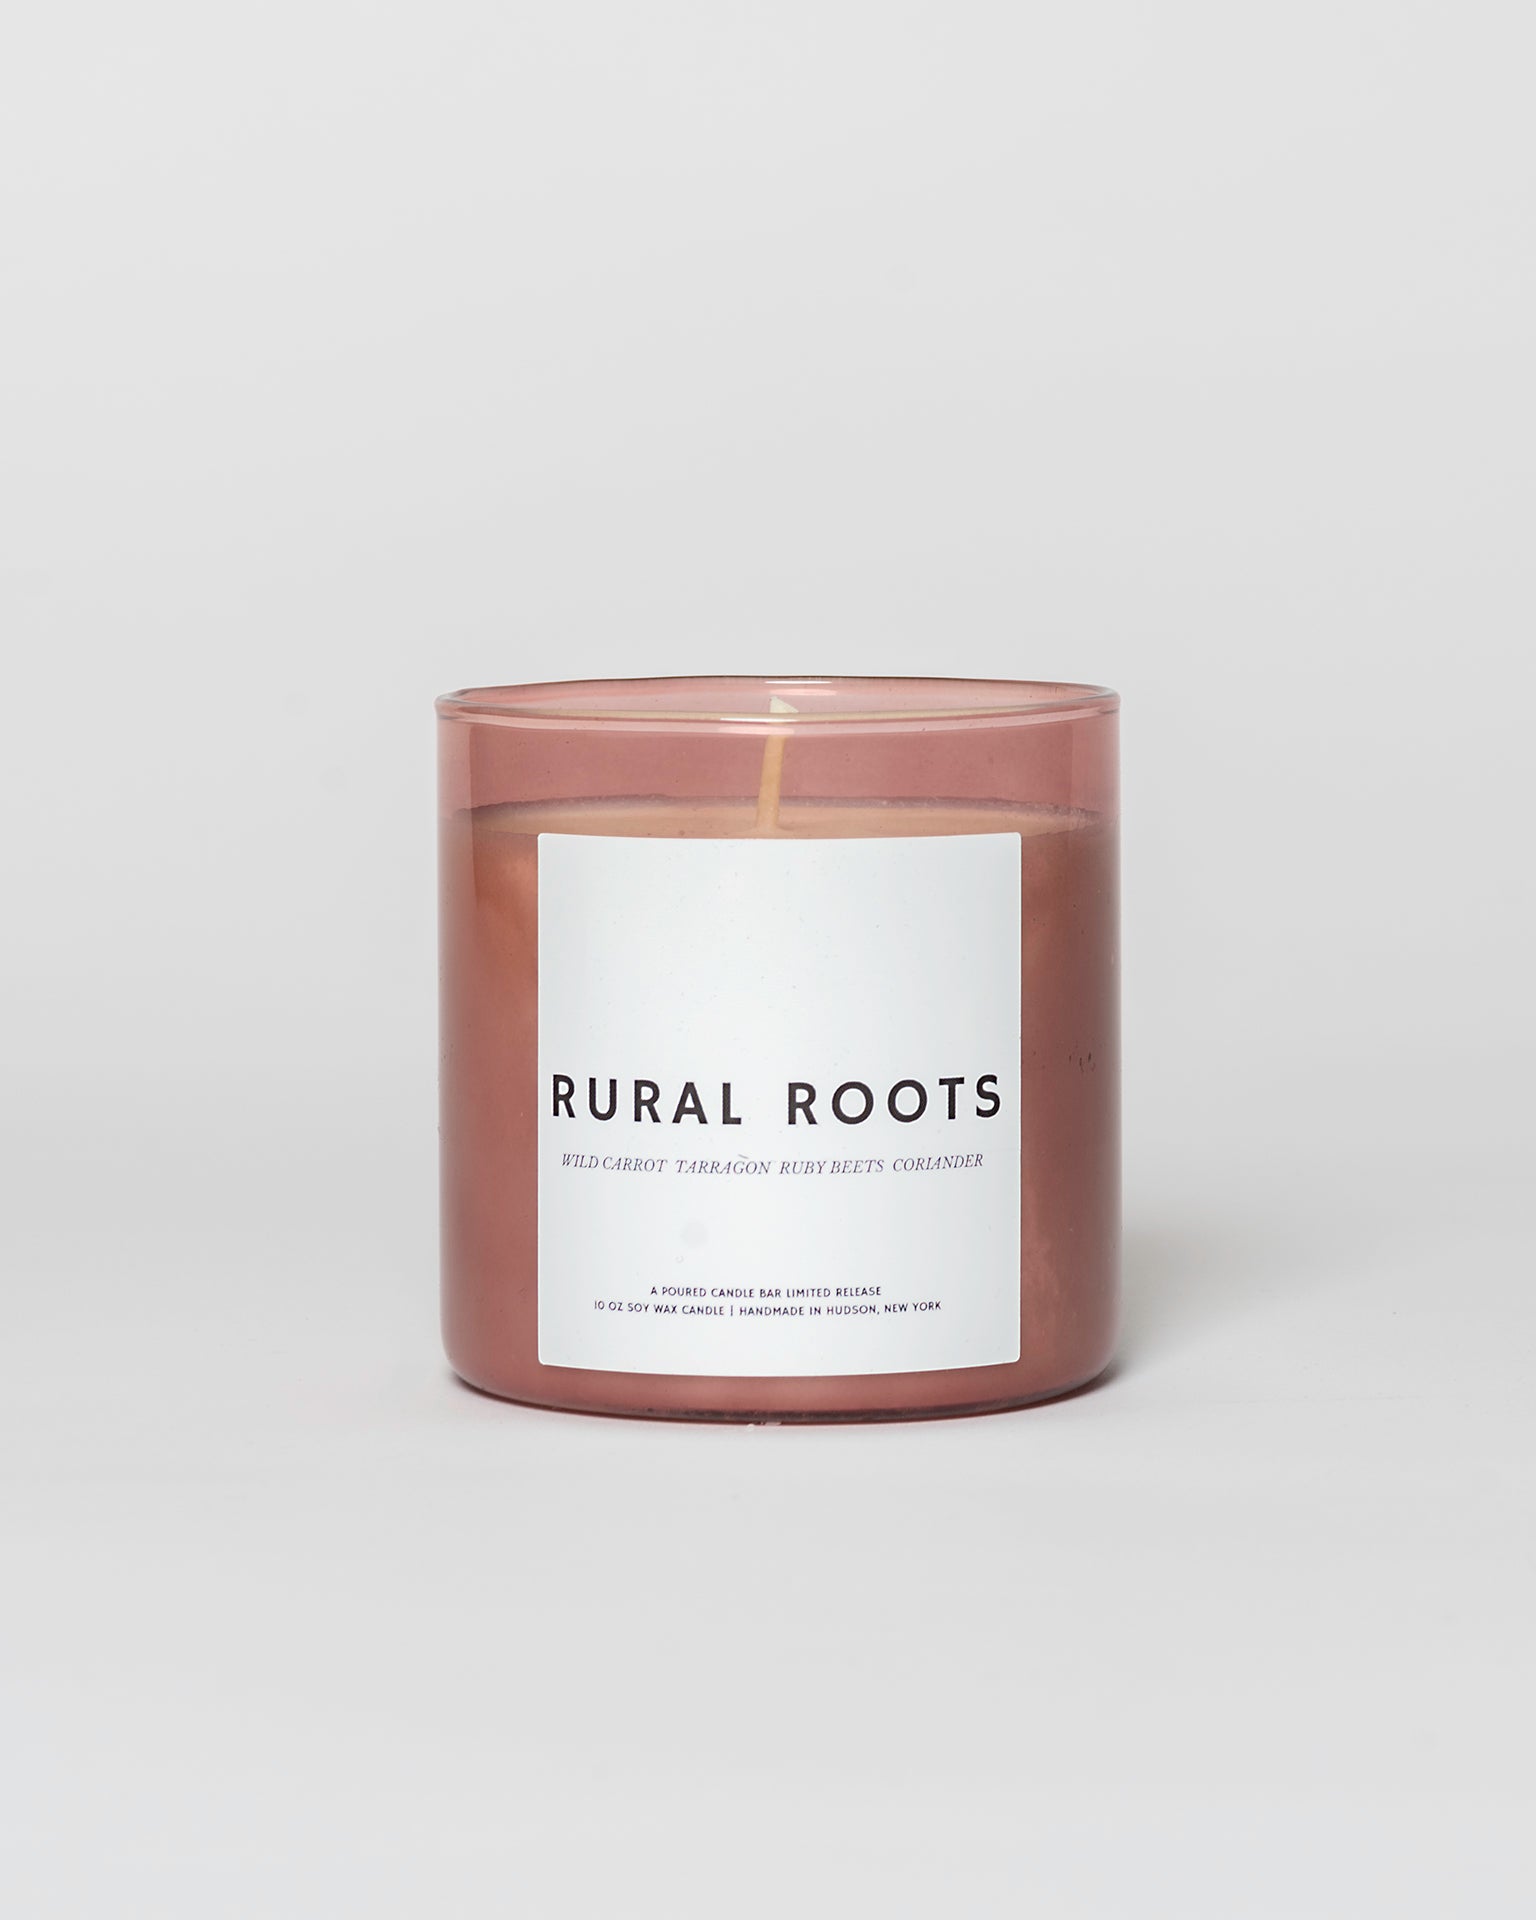 RURAL ROOTS